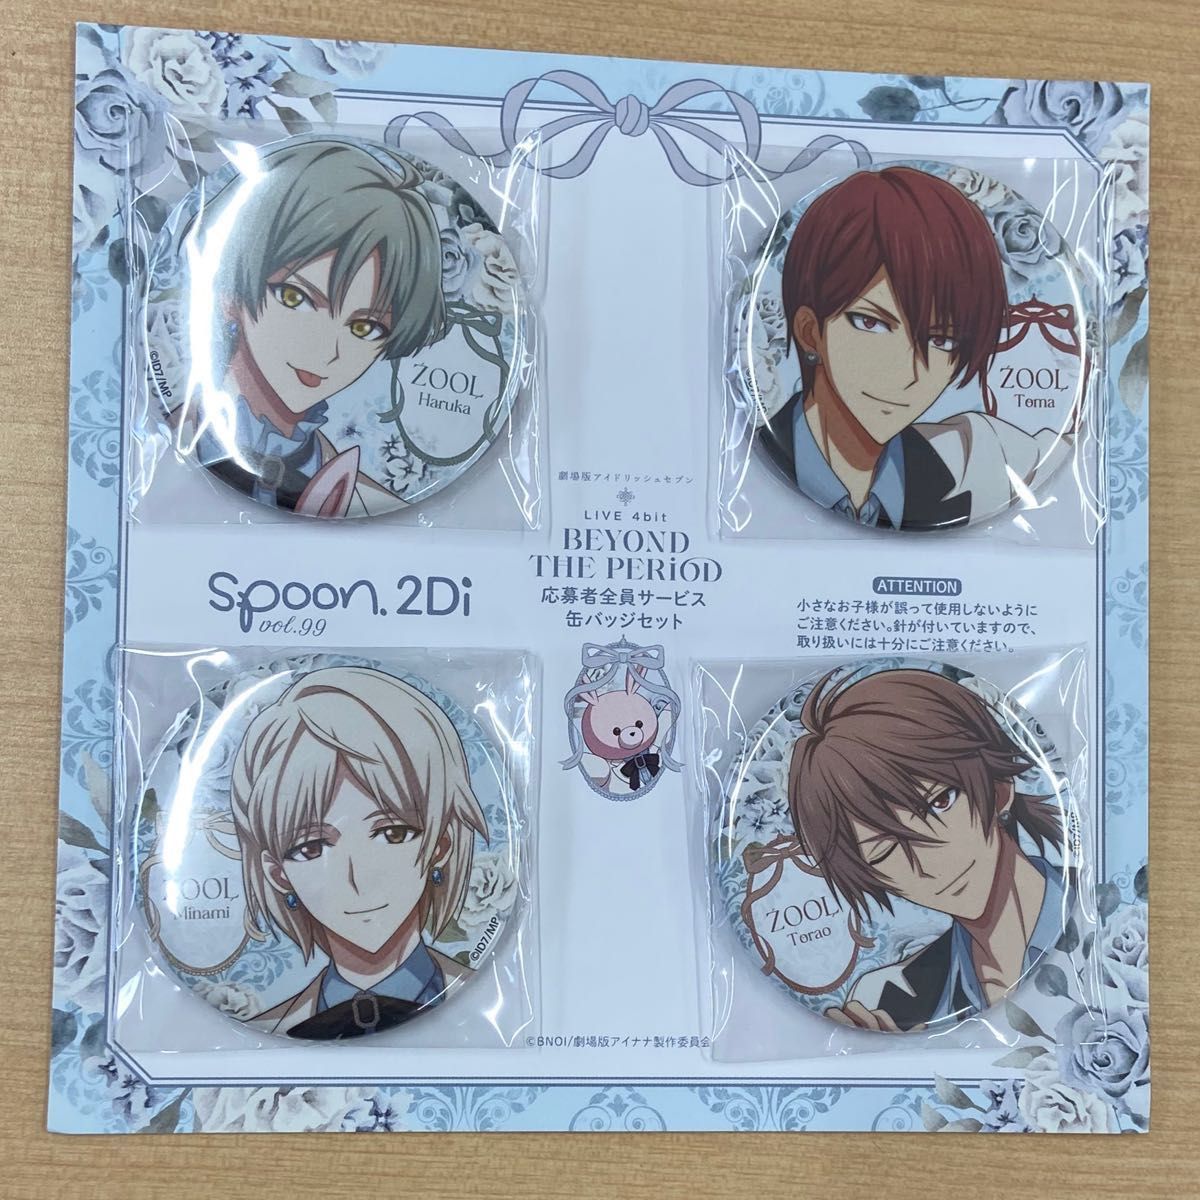 ZOOL spoon 缶バッジセット　悠　トウマ　巳波　虎於　ズール